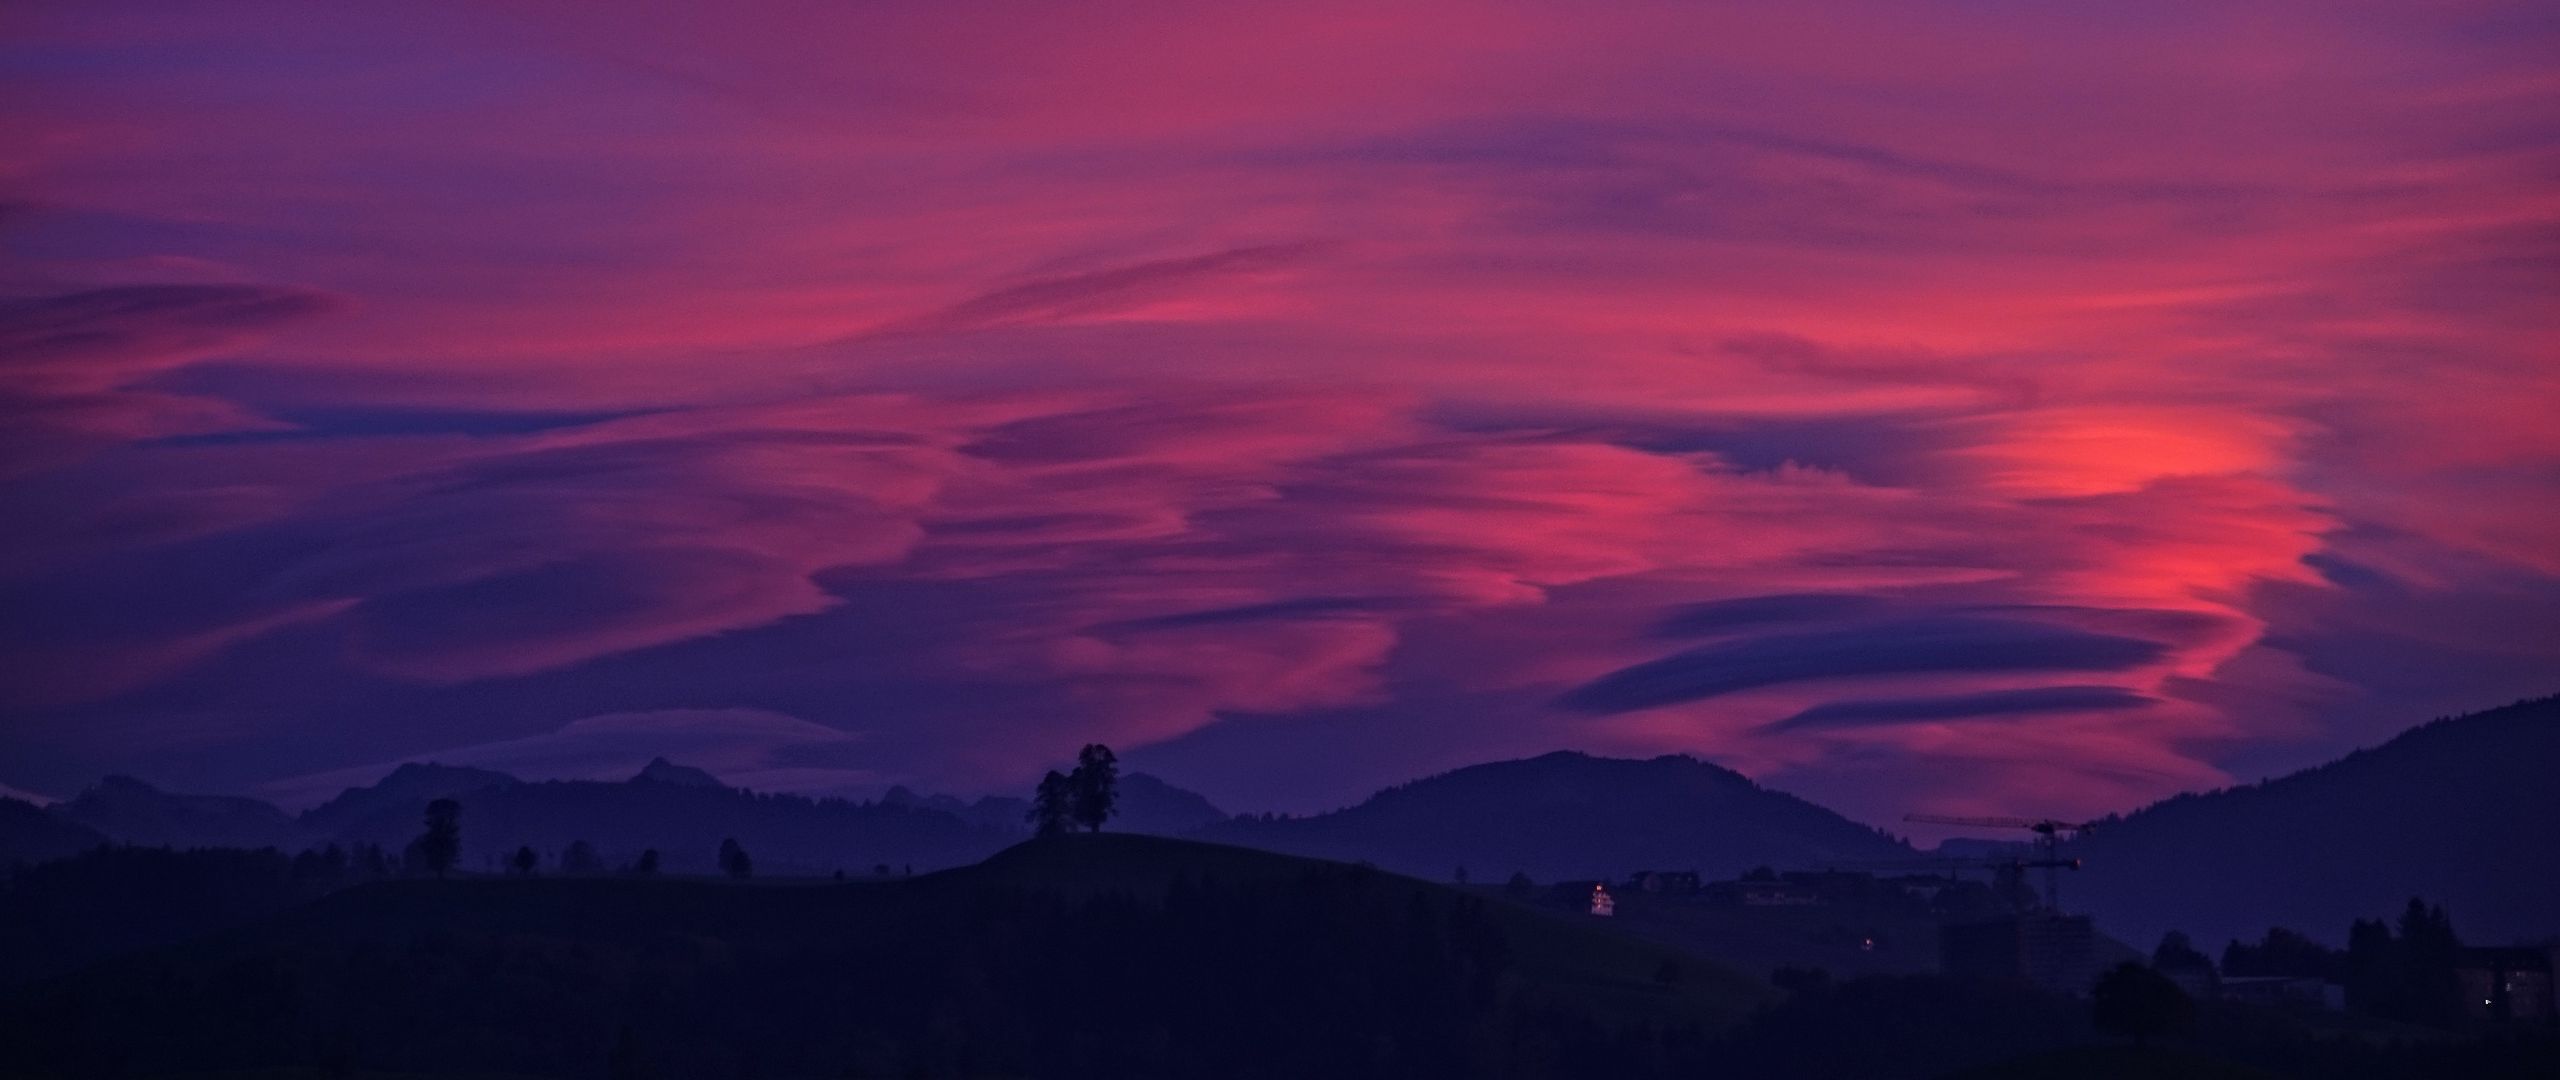 Download wallpaper 2560x1080 mountains, sky, clouds, purple dual